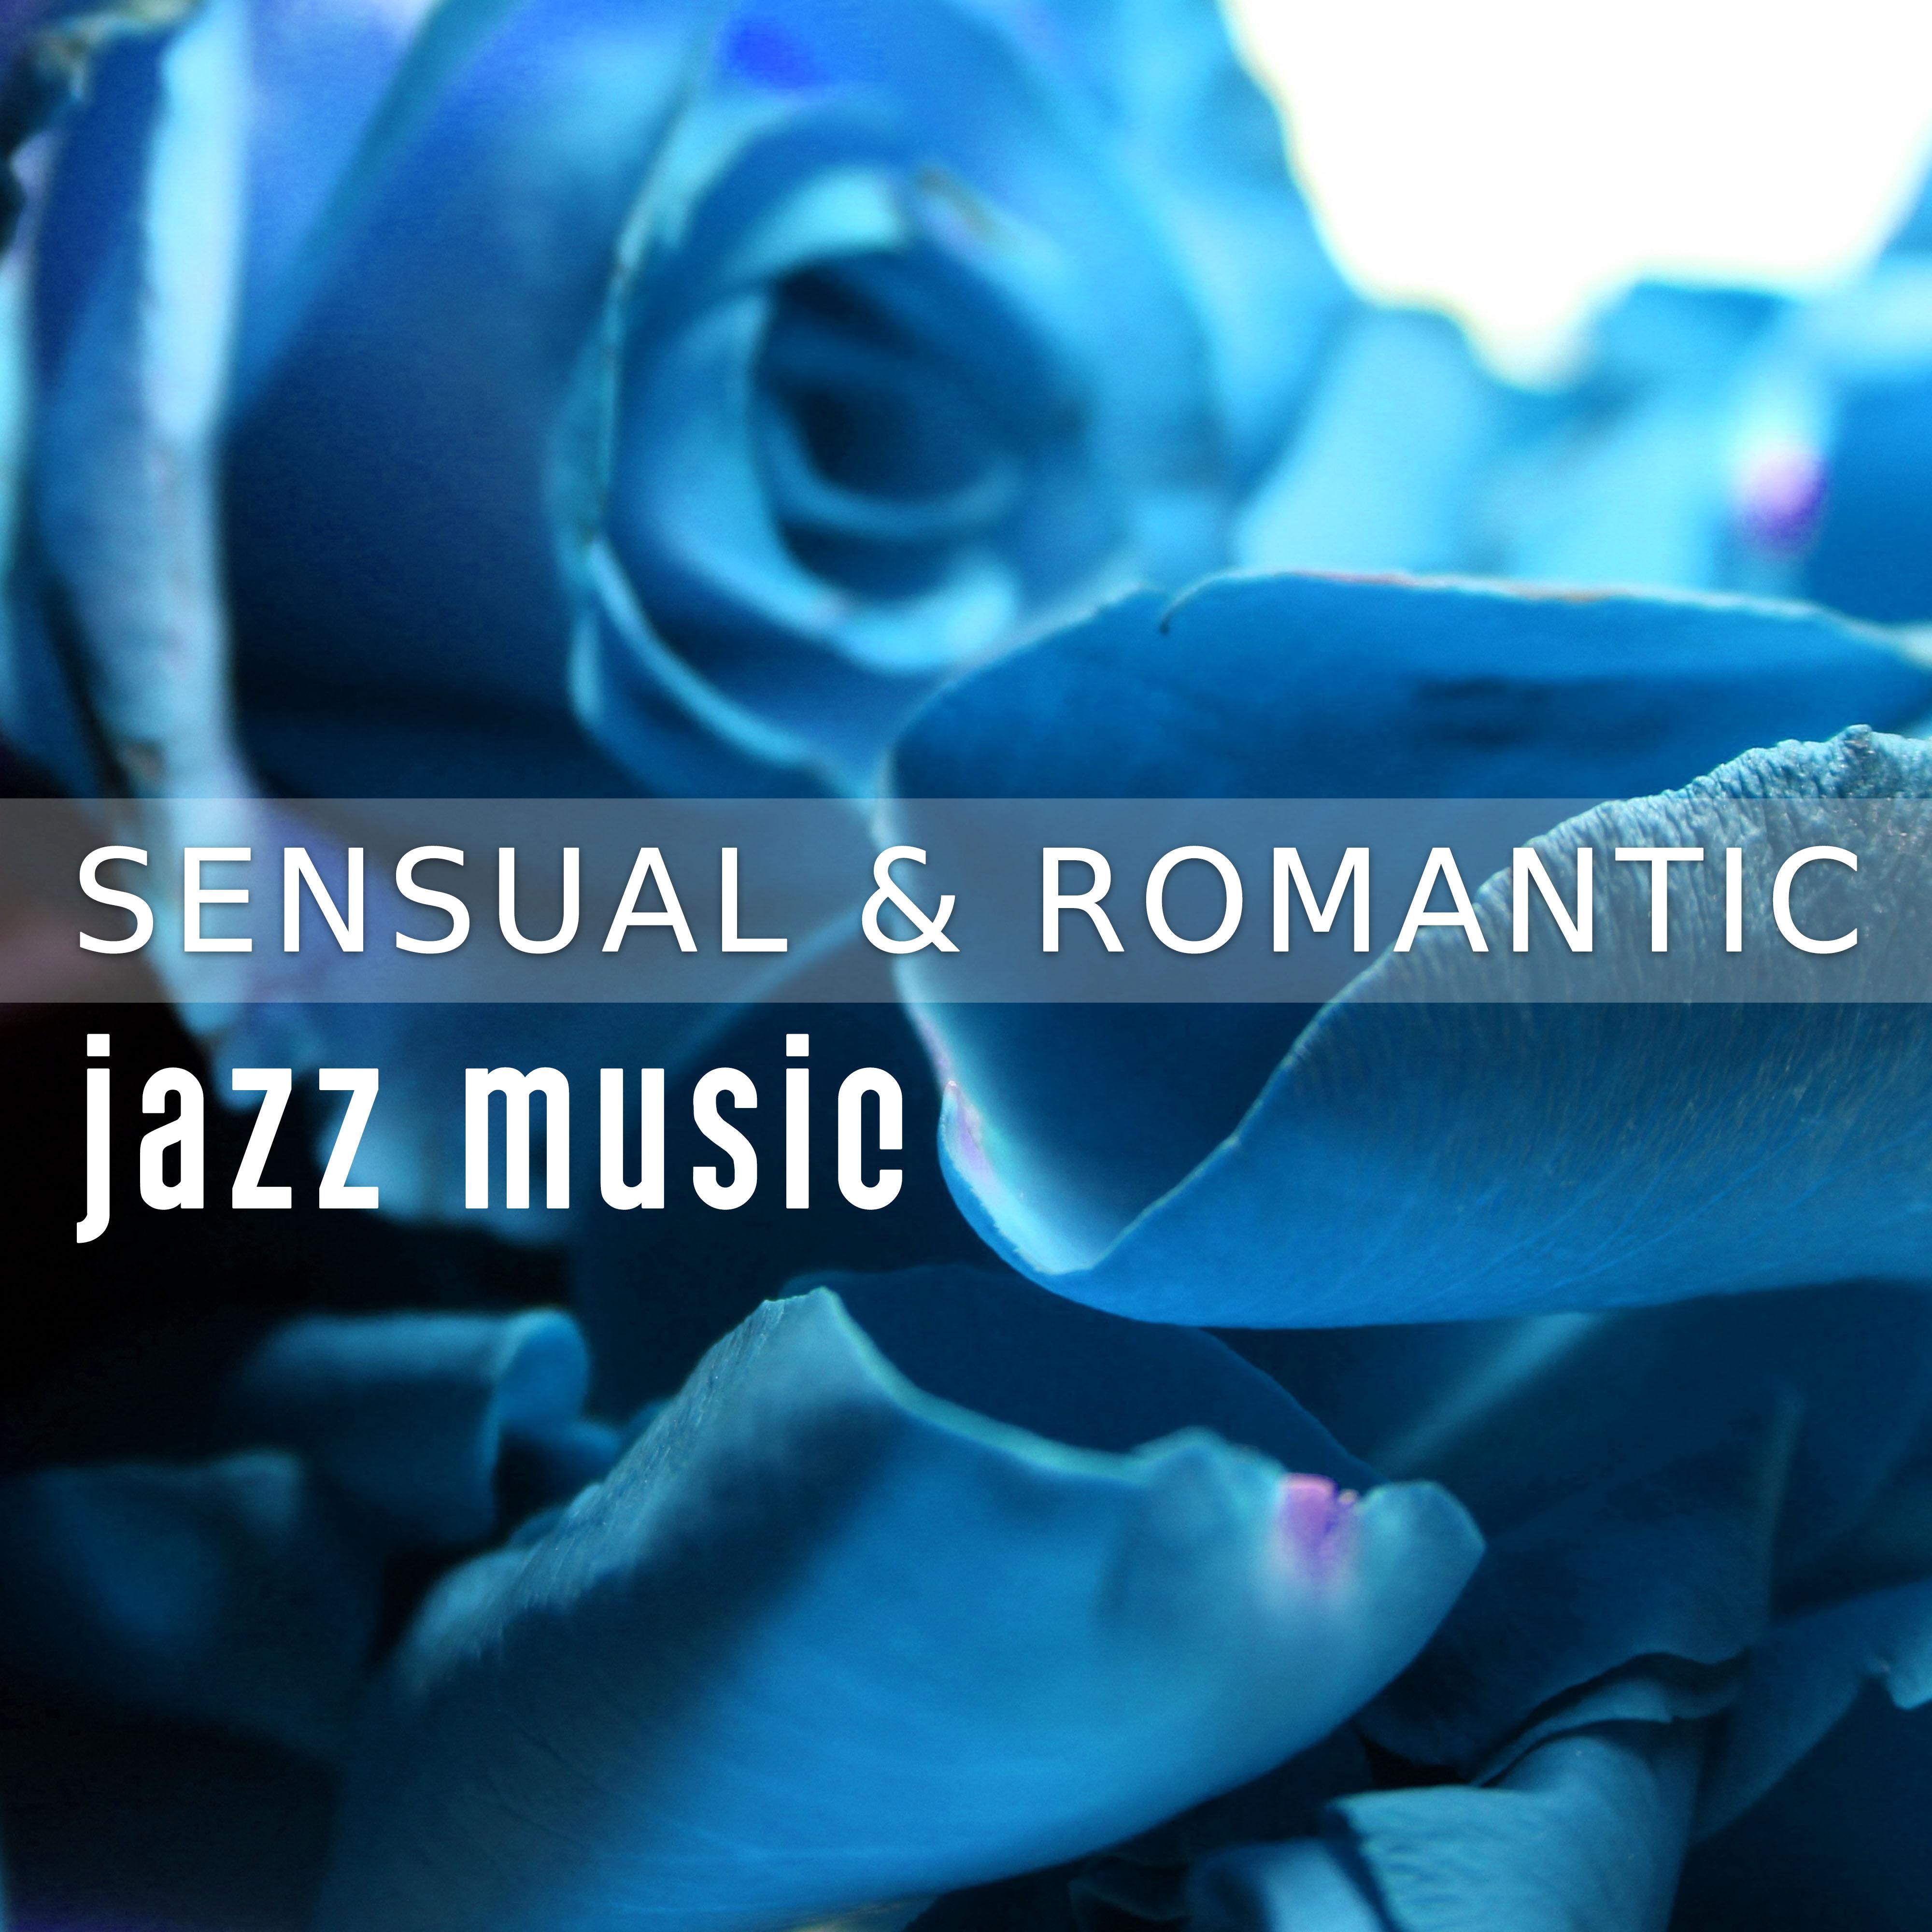 Sensual & Romantic Jazz Music – Hot Massage, **** Dance Moves, Jazz for Lovers, First Date